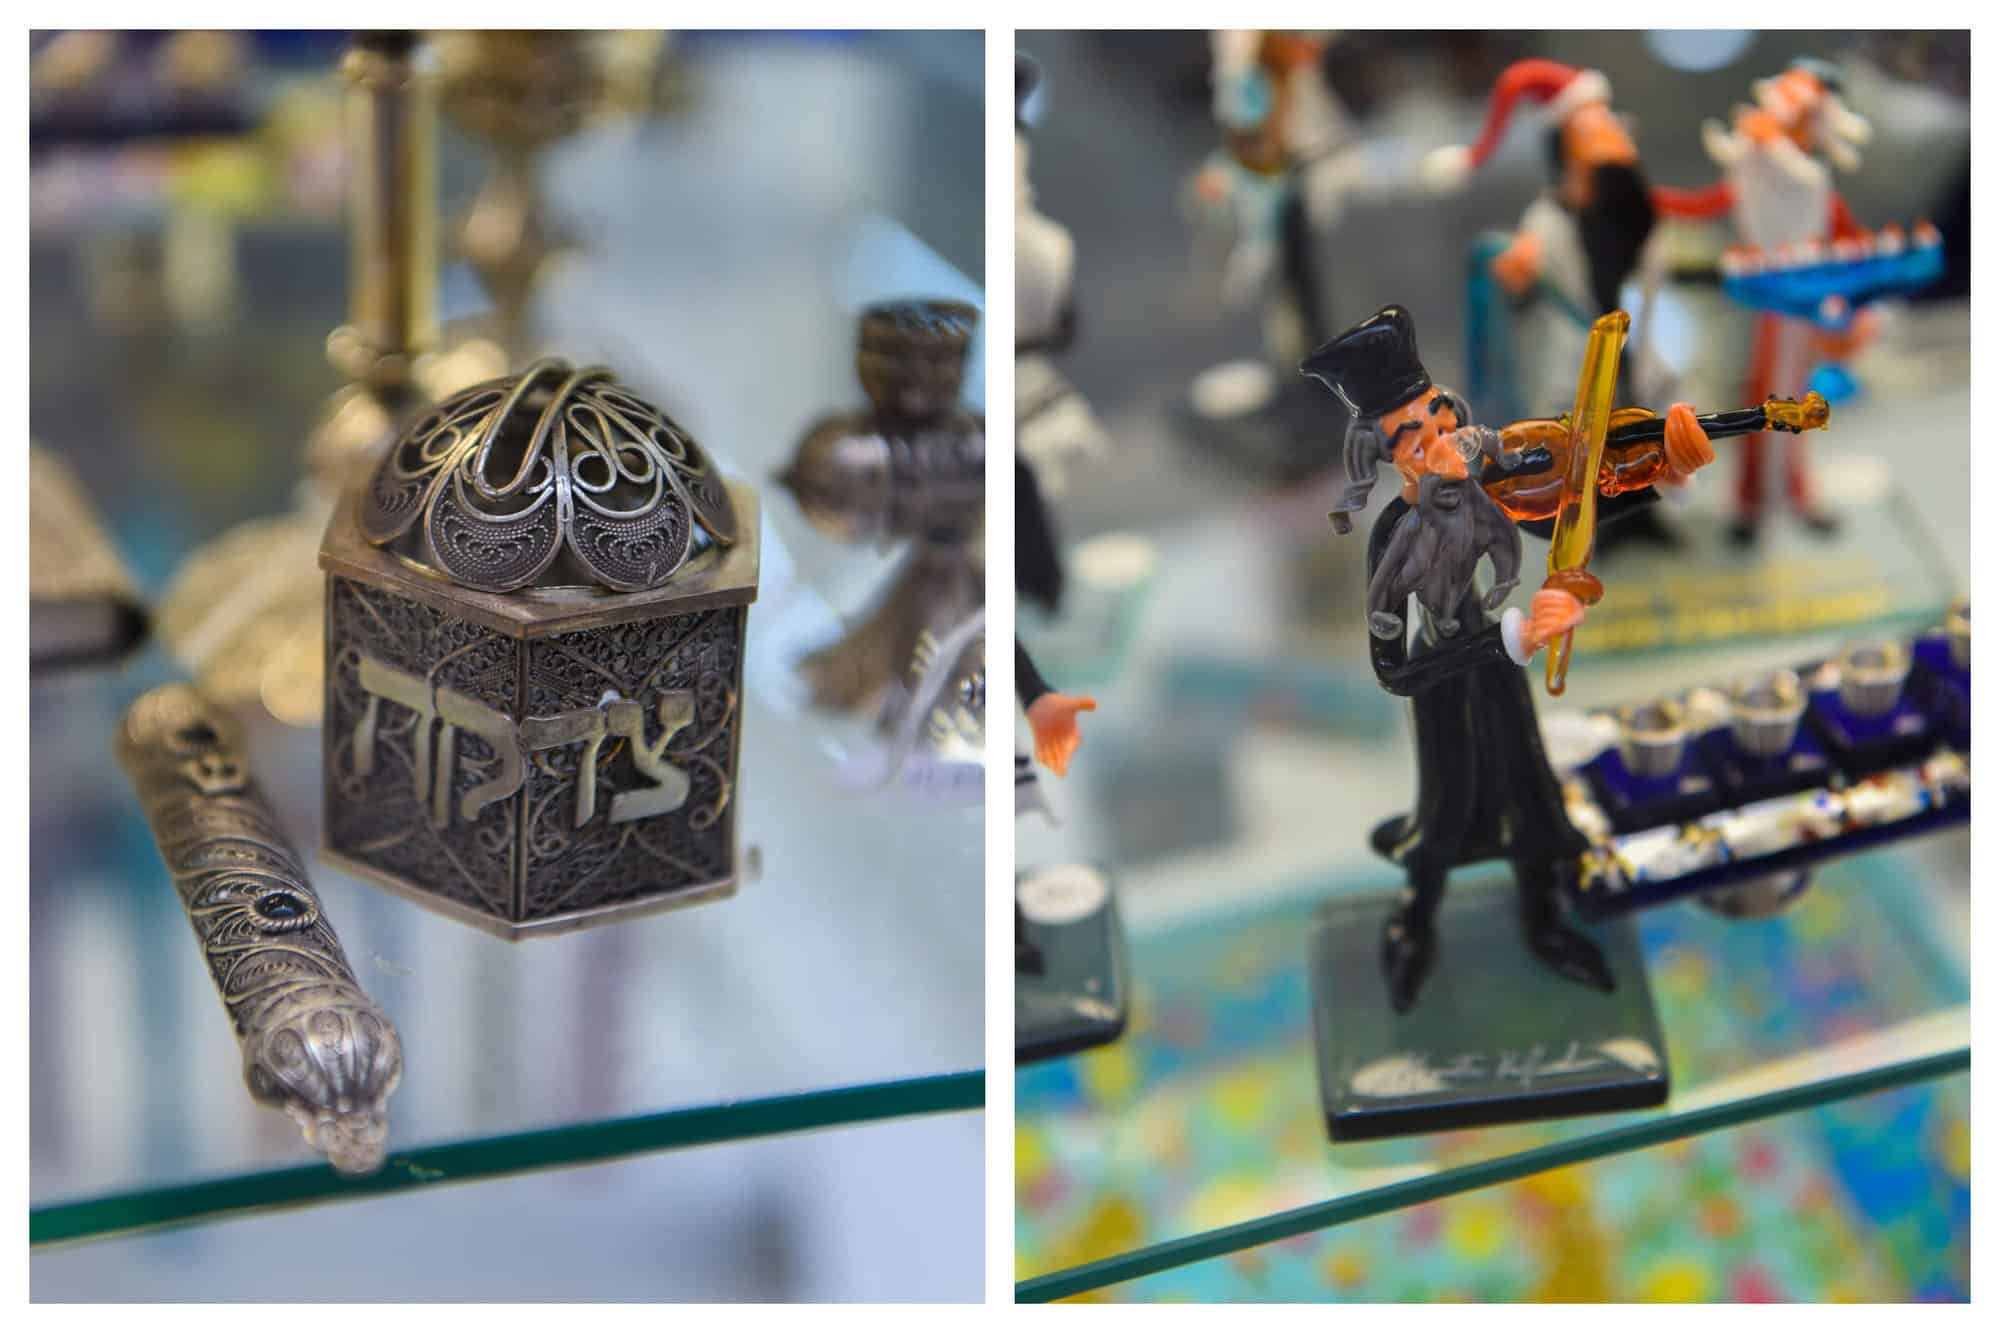 Close up photos of two small Jewish figurines. 